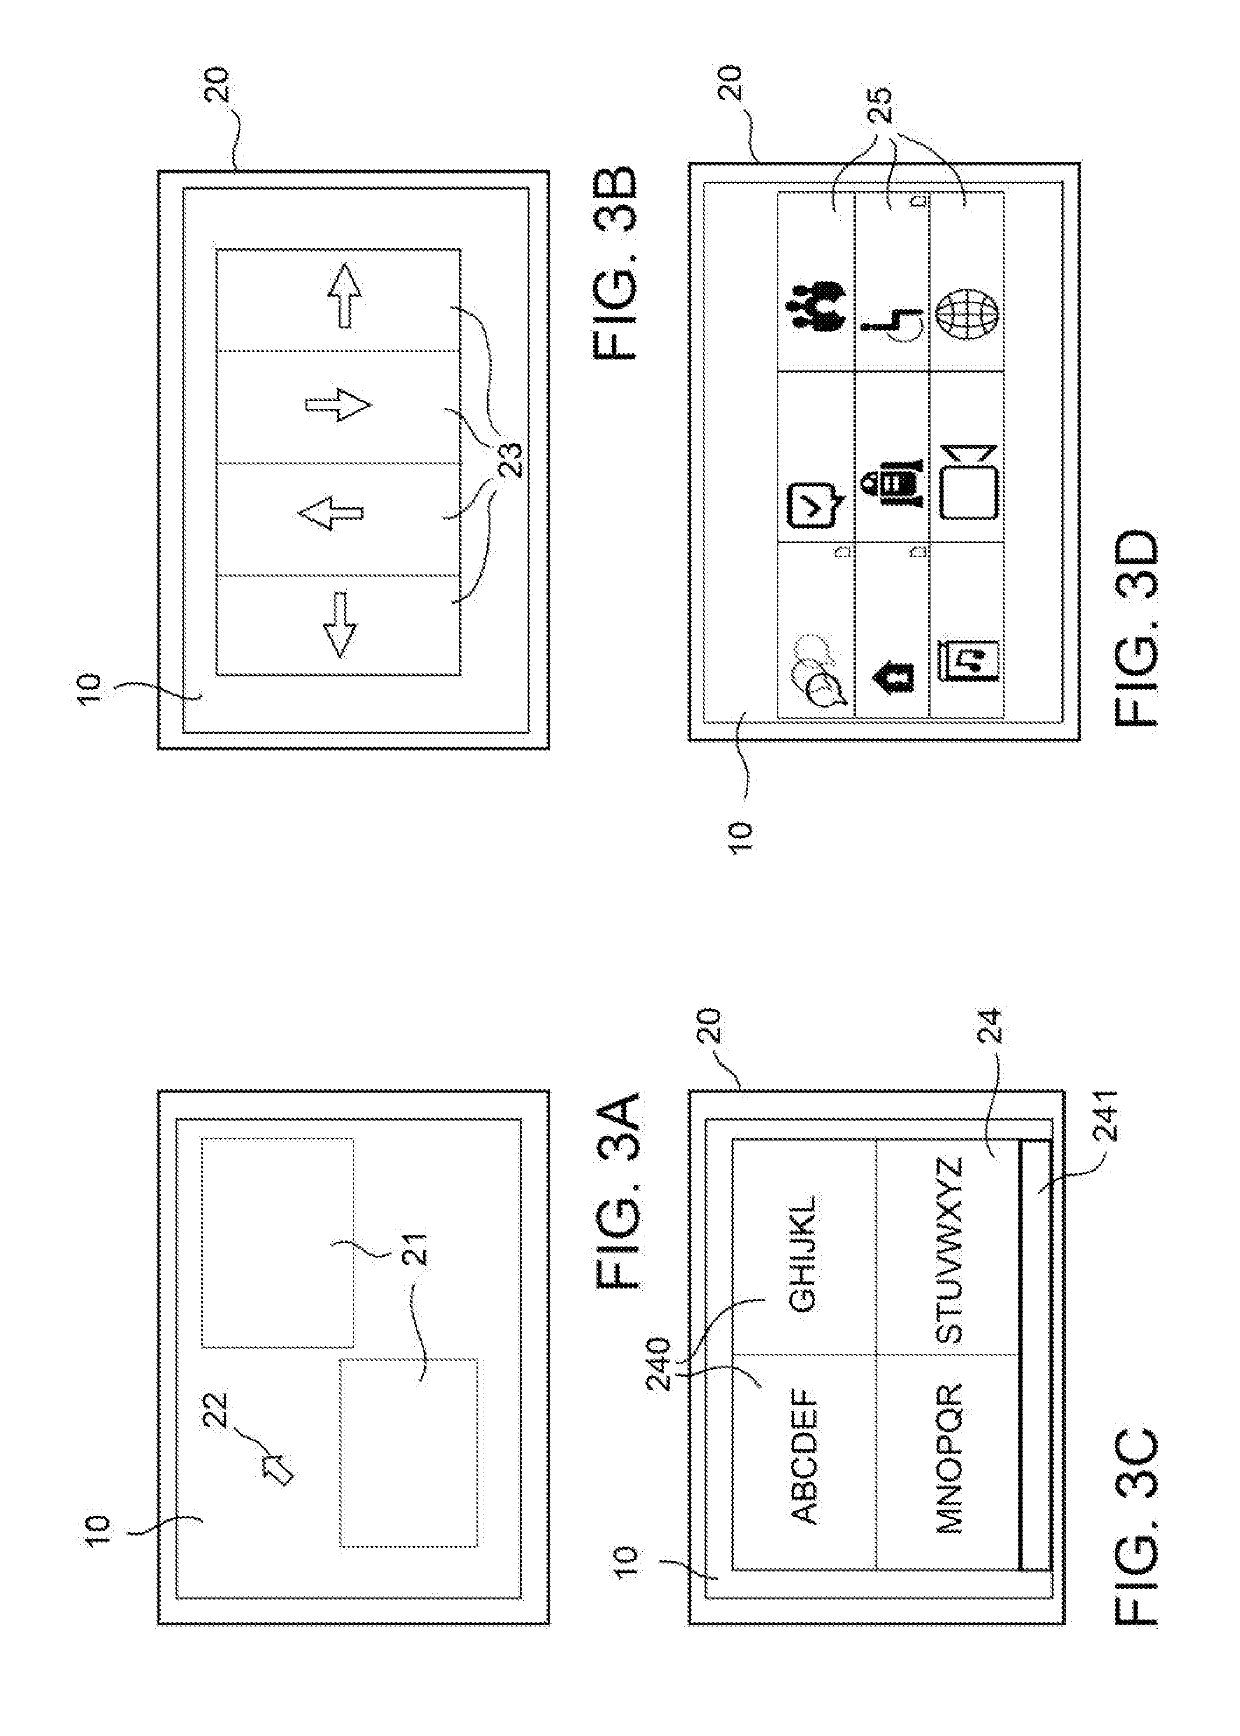 System for controlling assistive technologies and related method